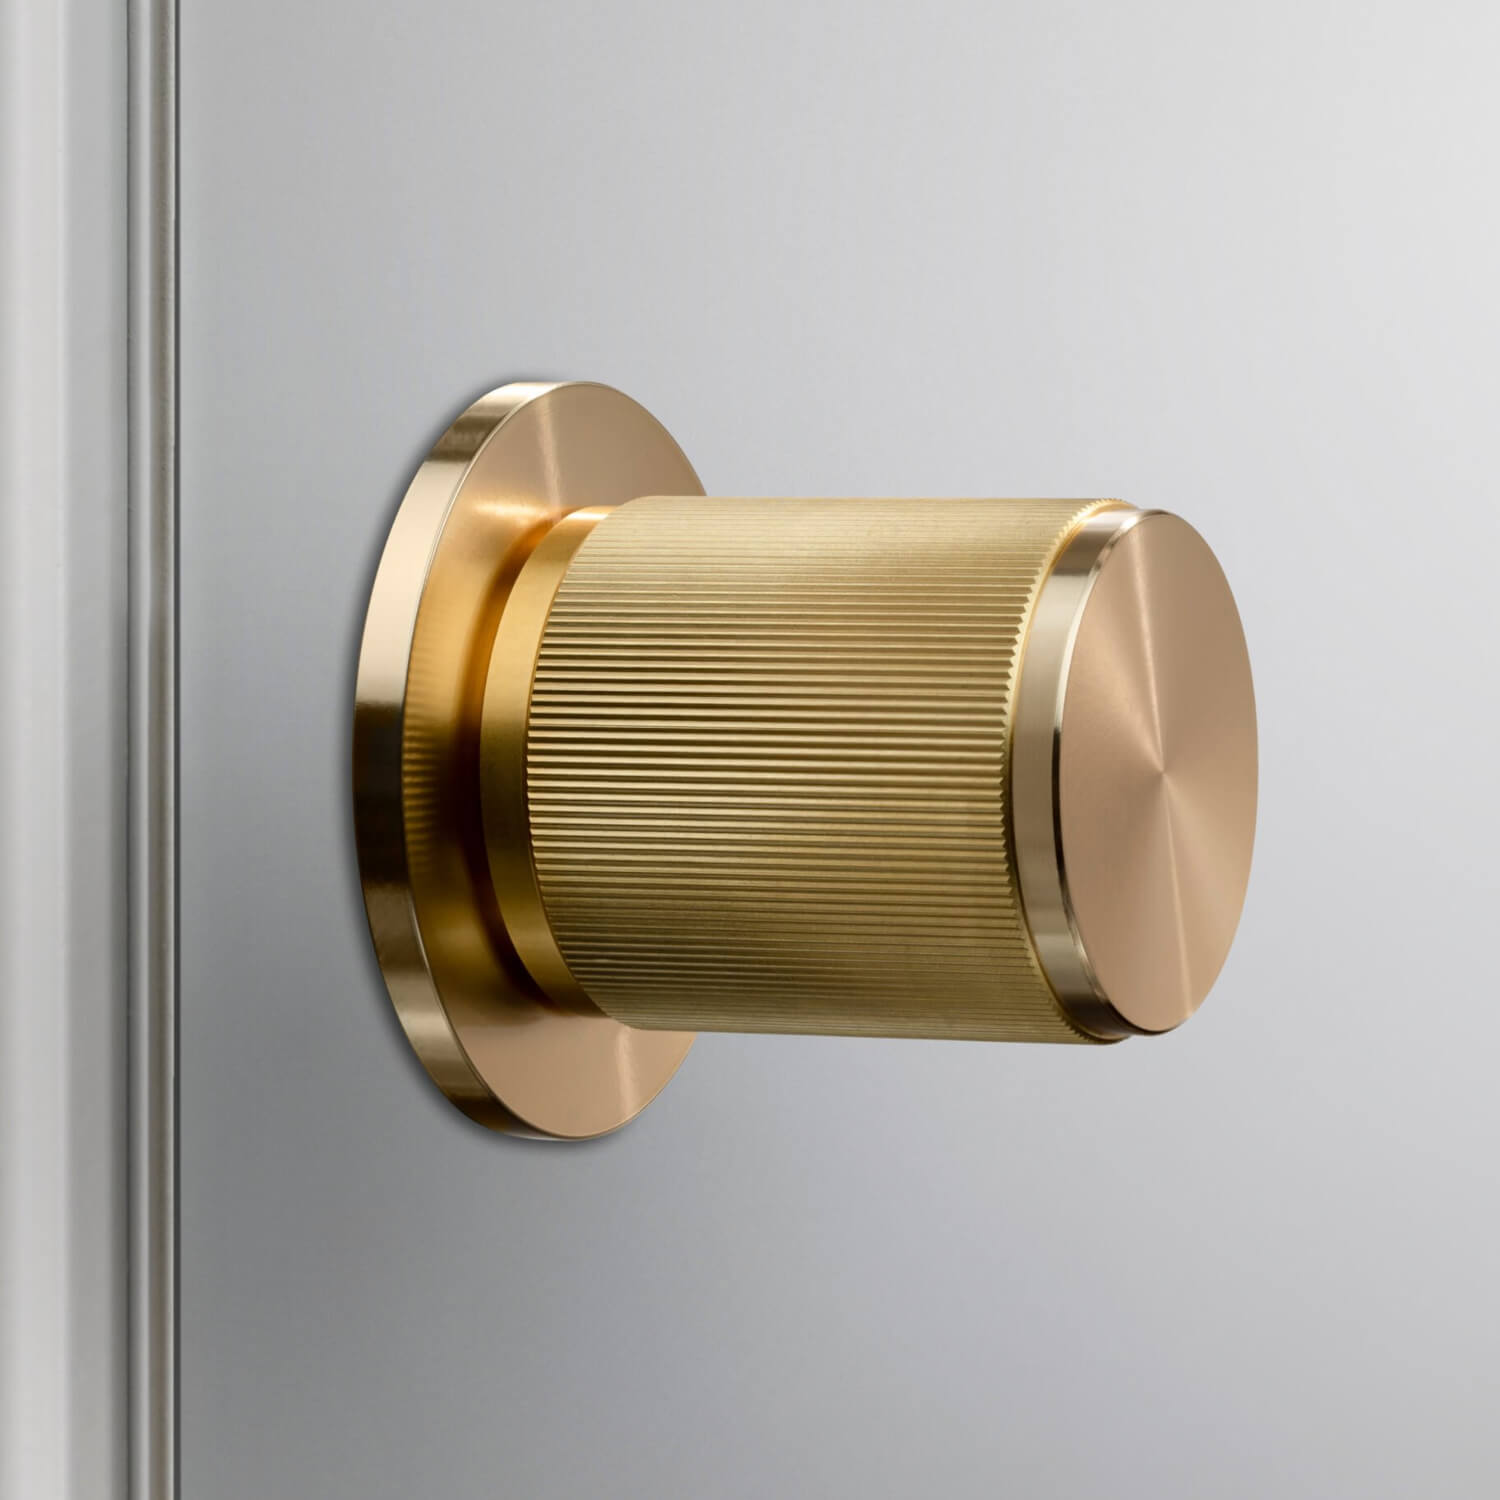 Buster+Punch Door knobs - Brass - Model LINEAR - cc30/38 mm - BUSTER+PUNCH Door  knob - VillaHus